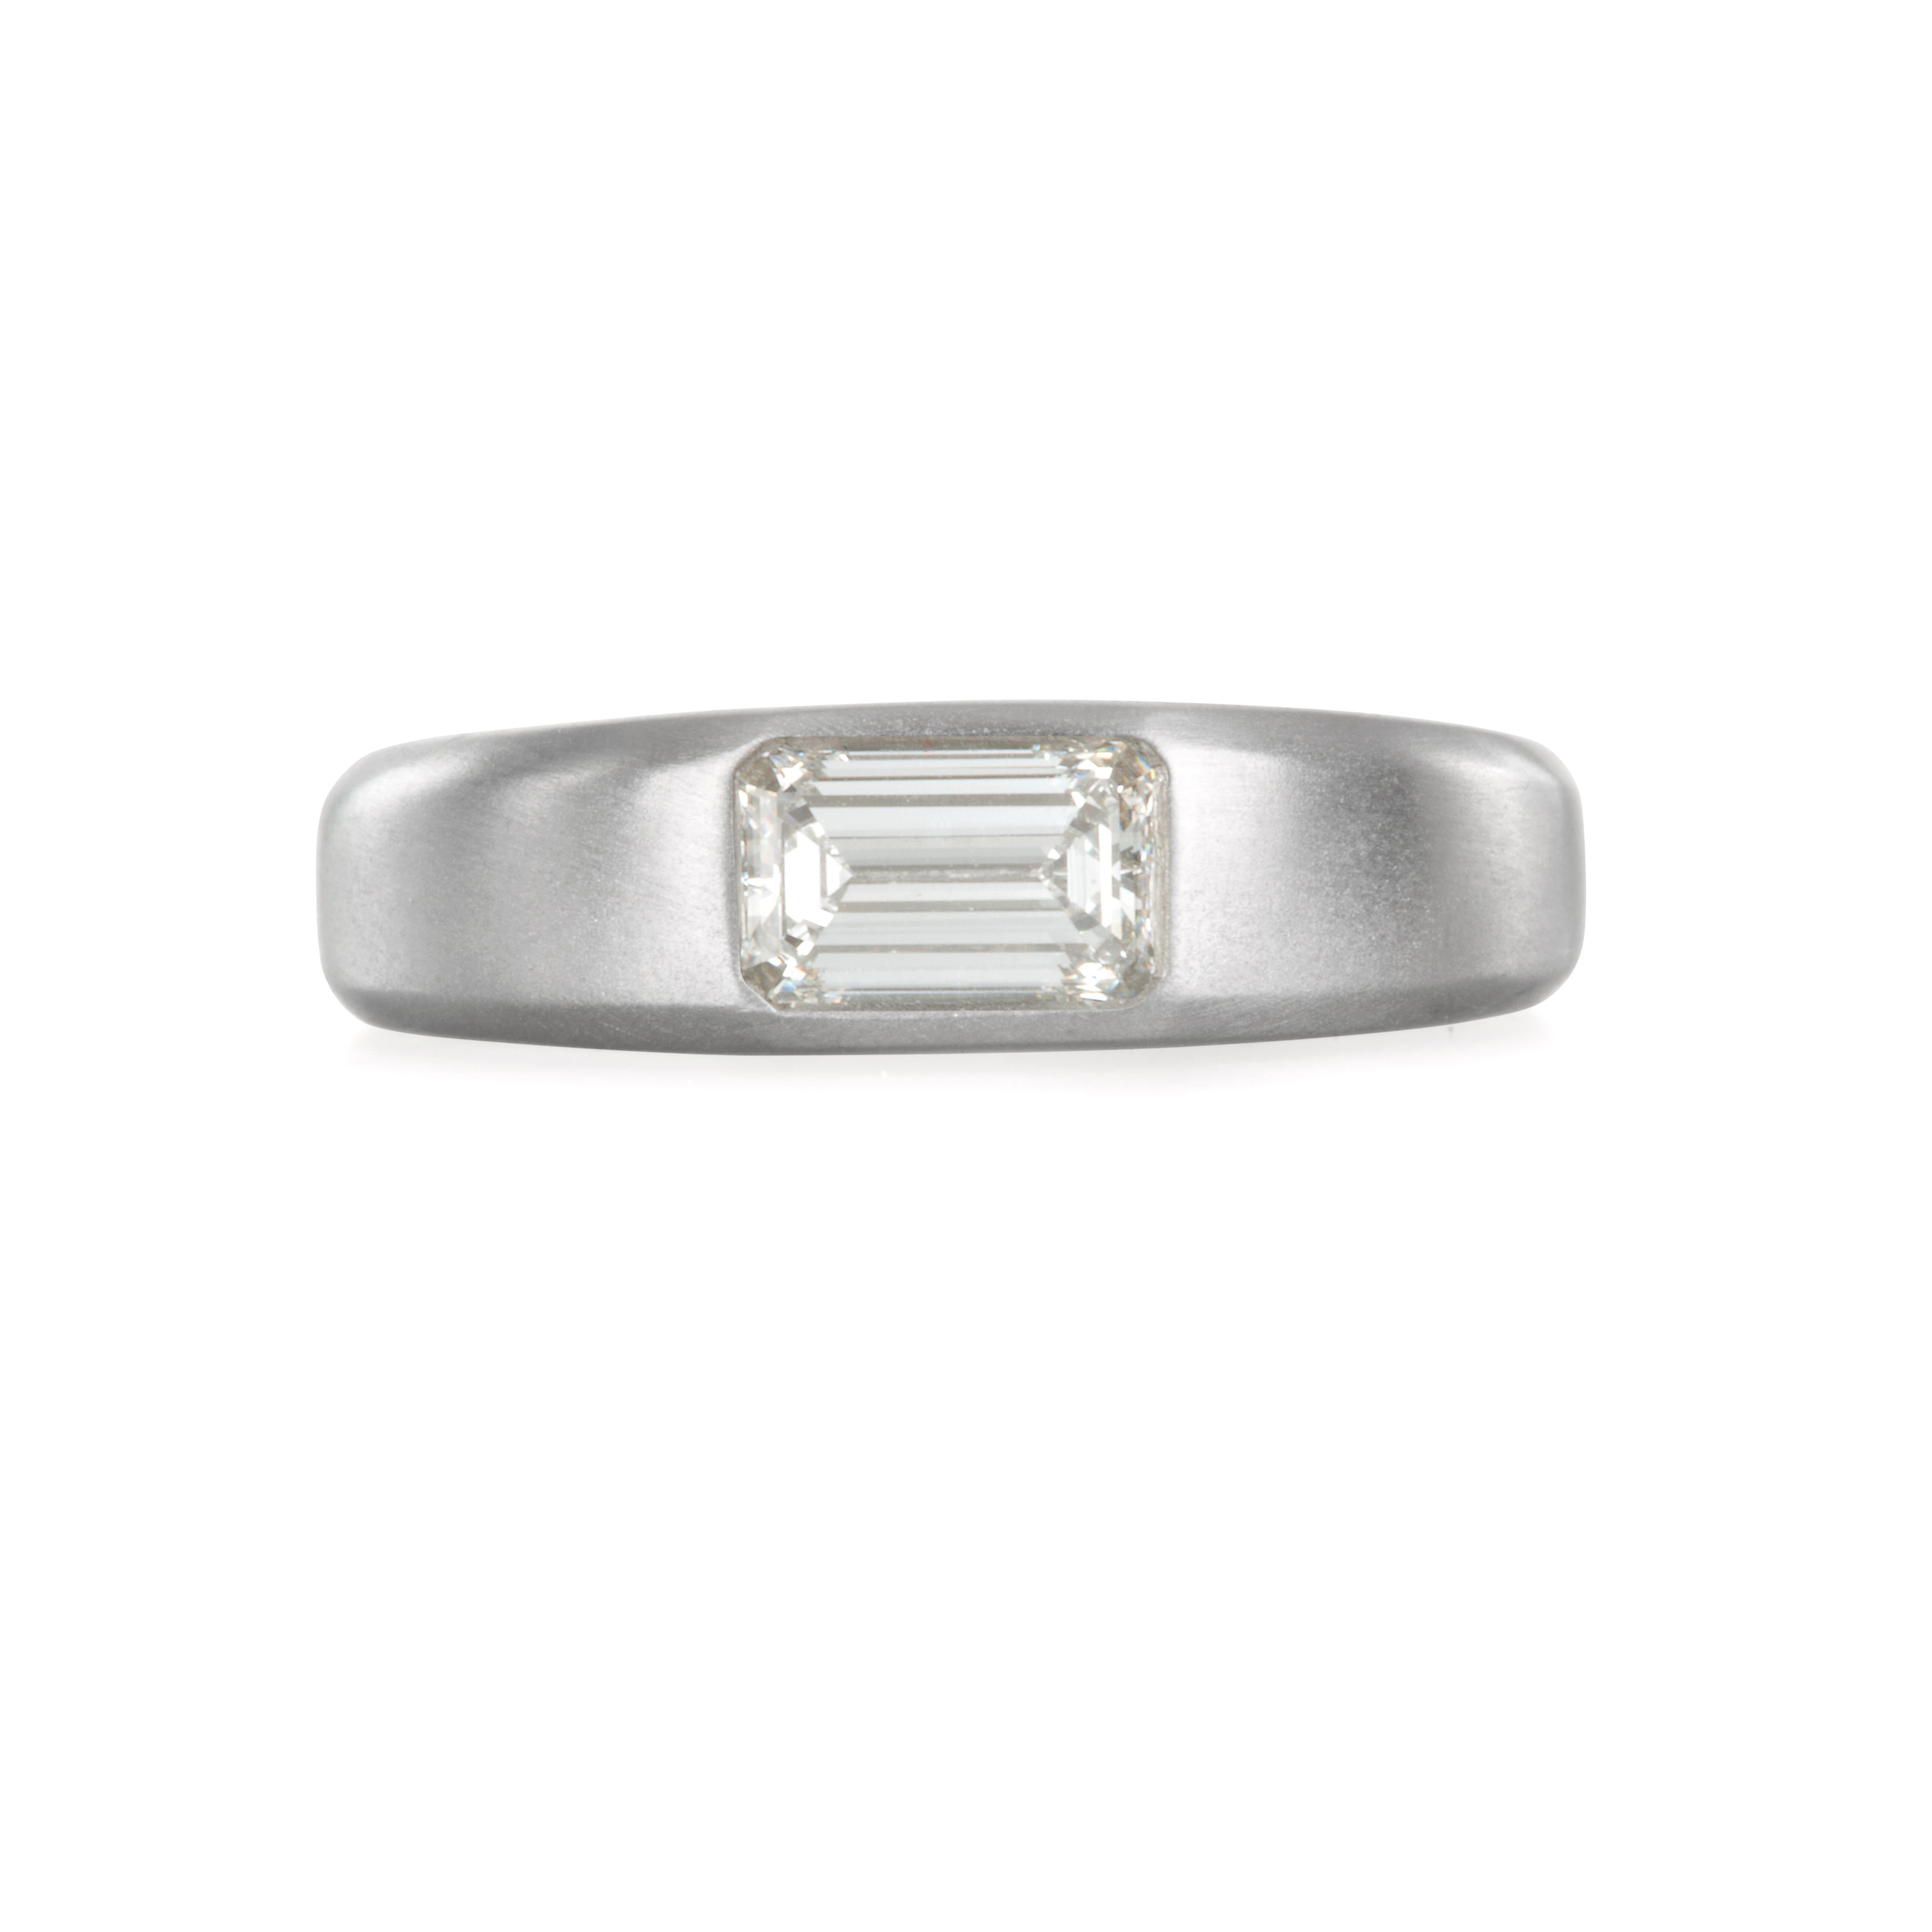 The ultimate statement of luxury and style.  Platinum modern engagement ring or stack ring featuring the crisp and clean lines of an emerald cut diamond.  Forge your own style and never settle for average.  Matte-finished.  

Size 6.5
Diamond =